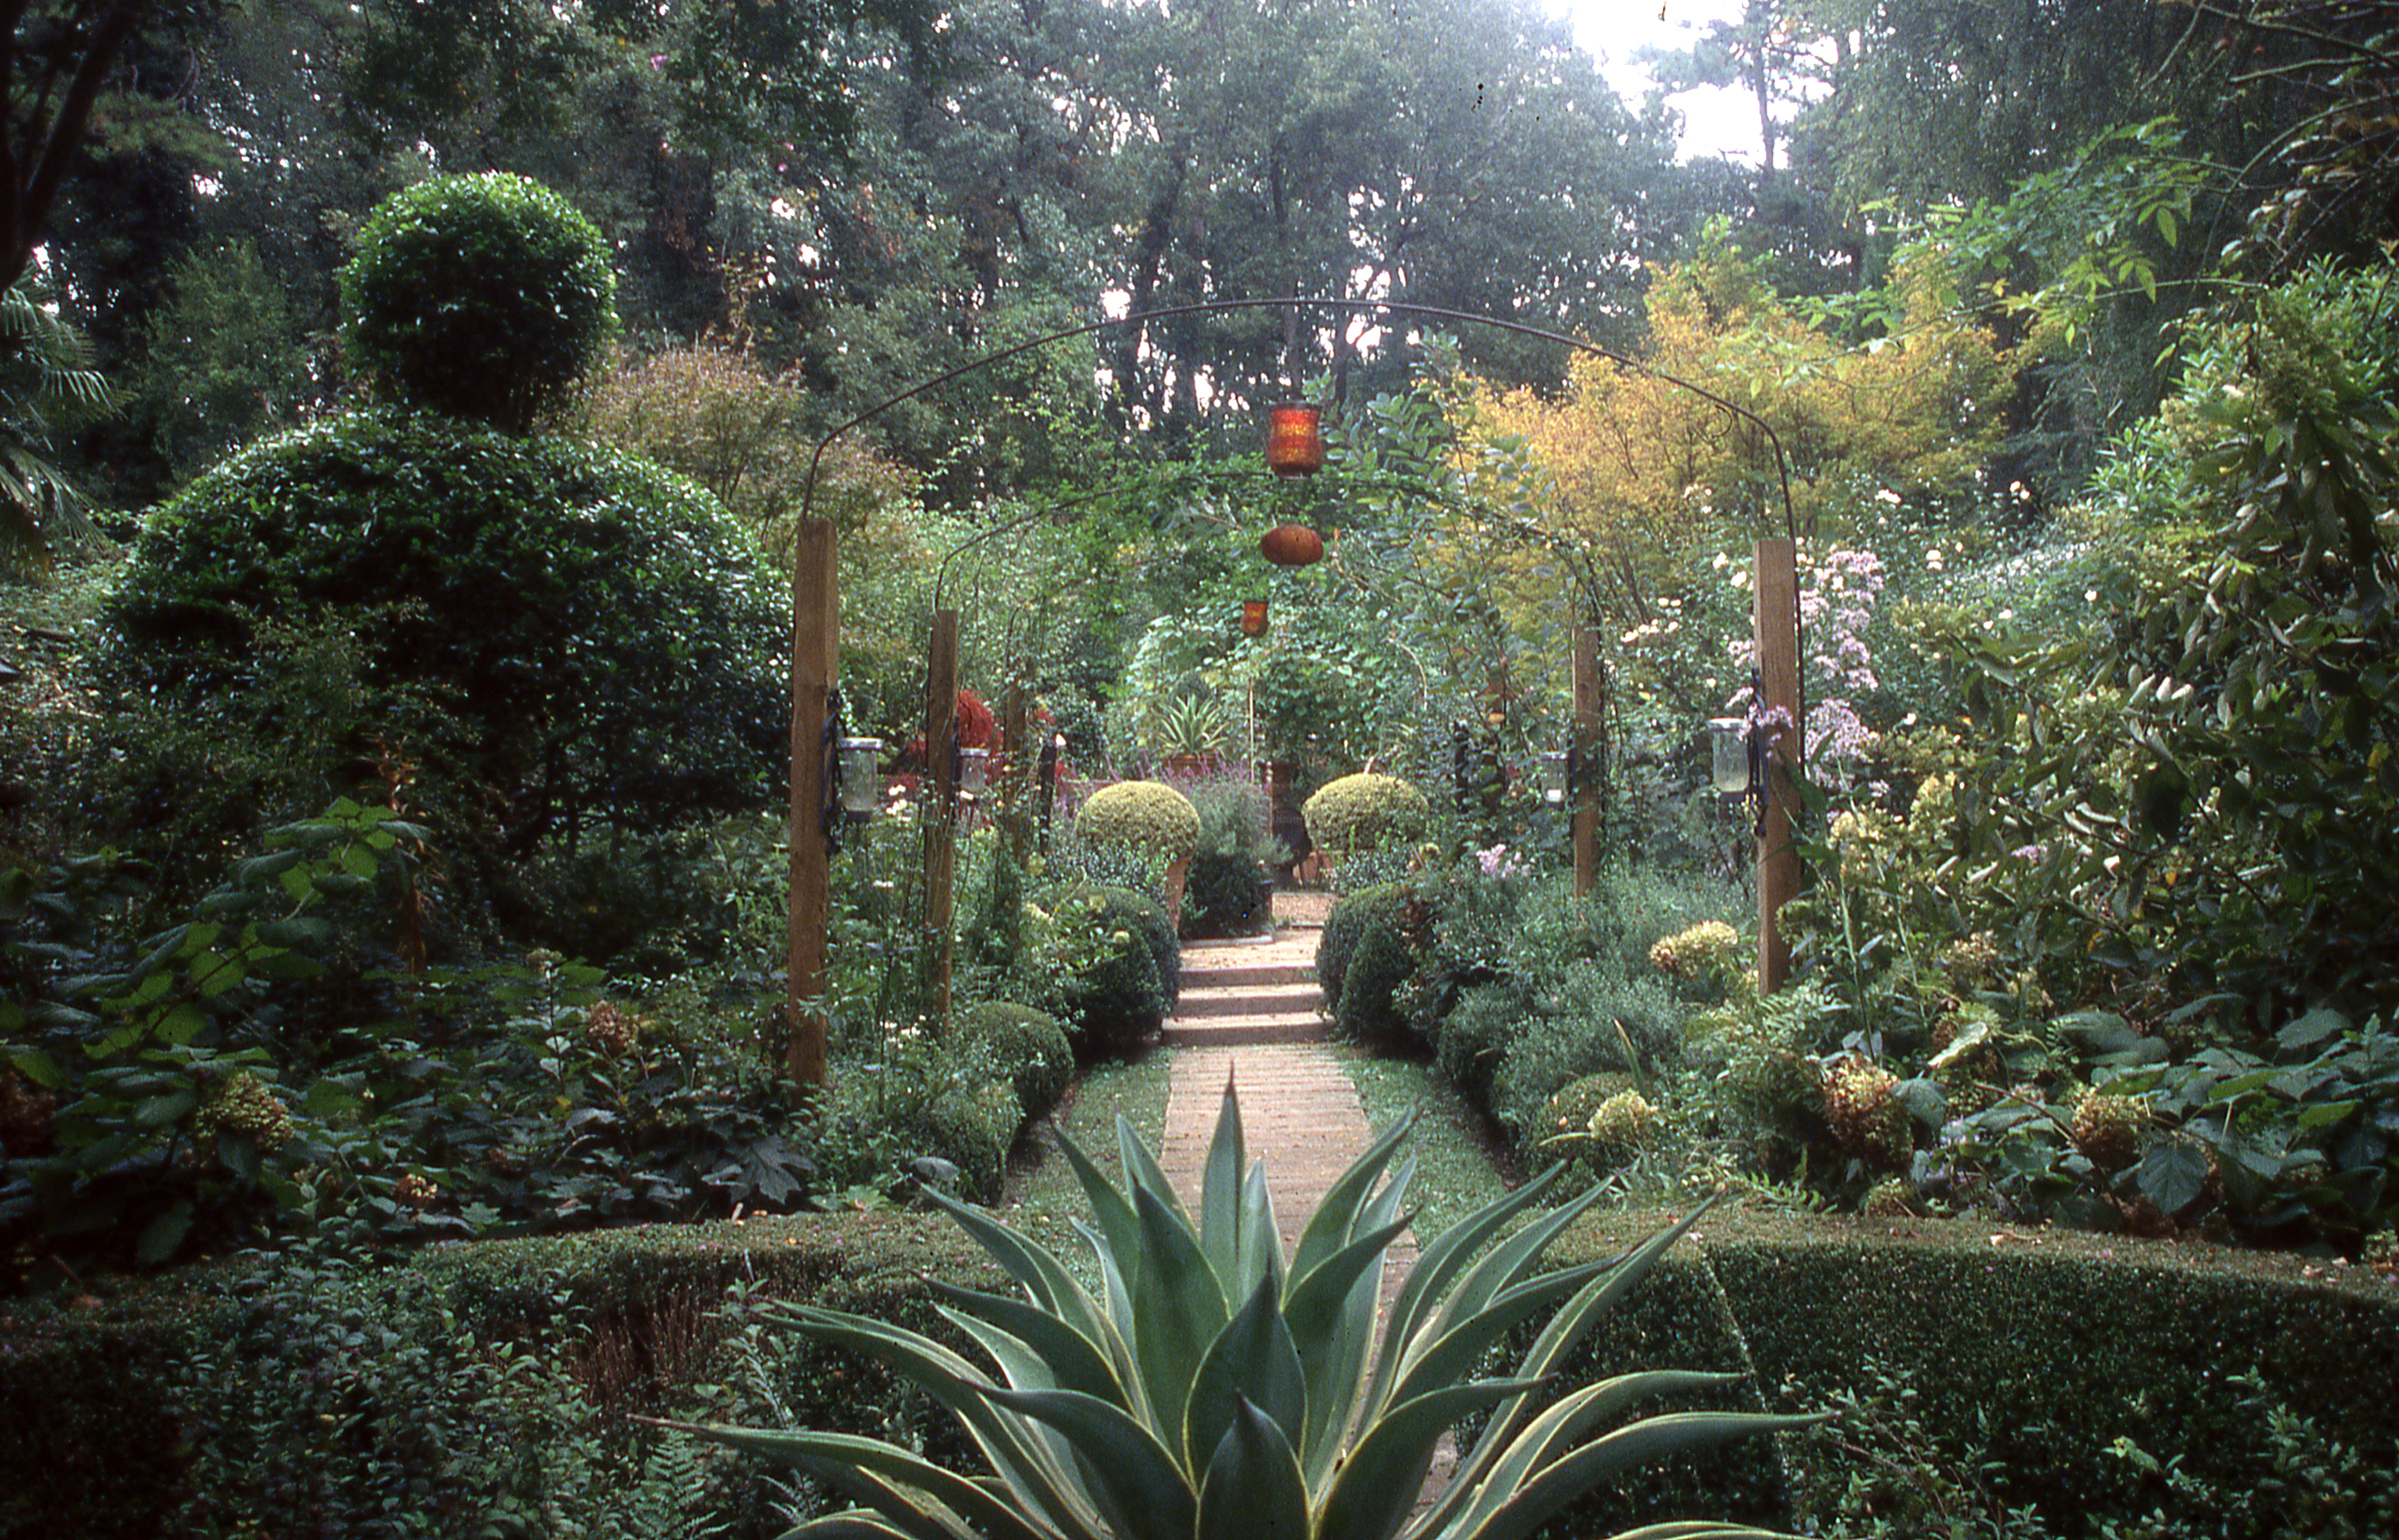 Ryan Gainey is a self taught plantsman and garden designer featured in the documentary The Well-Placed Weed: The Bountiful Gardens of Ryan Gainey. This is part of his garden near Atlanta.